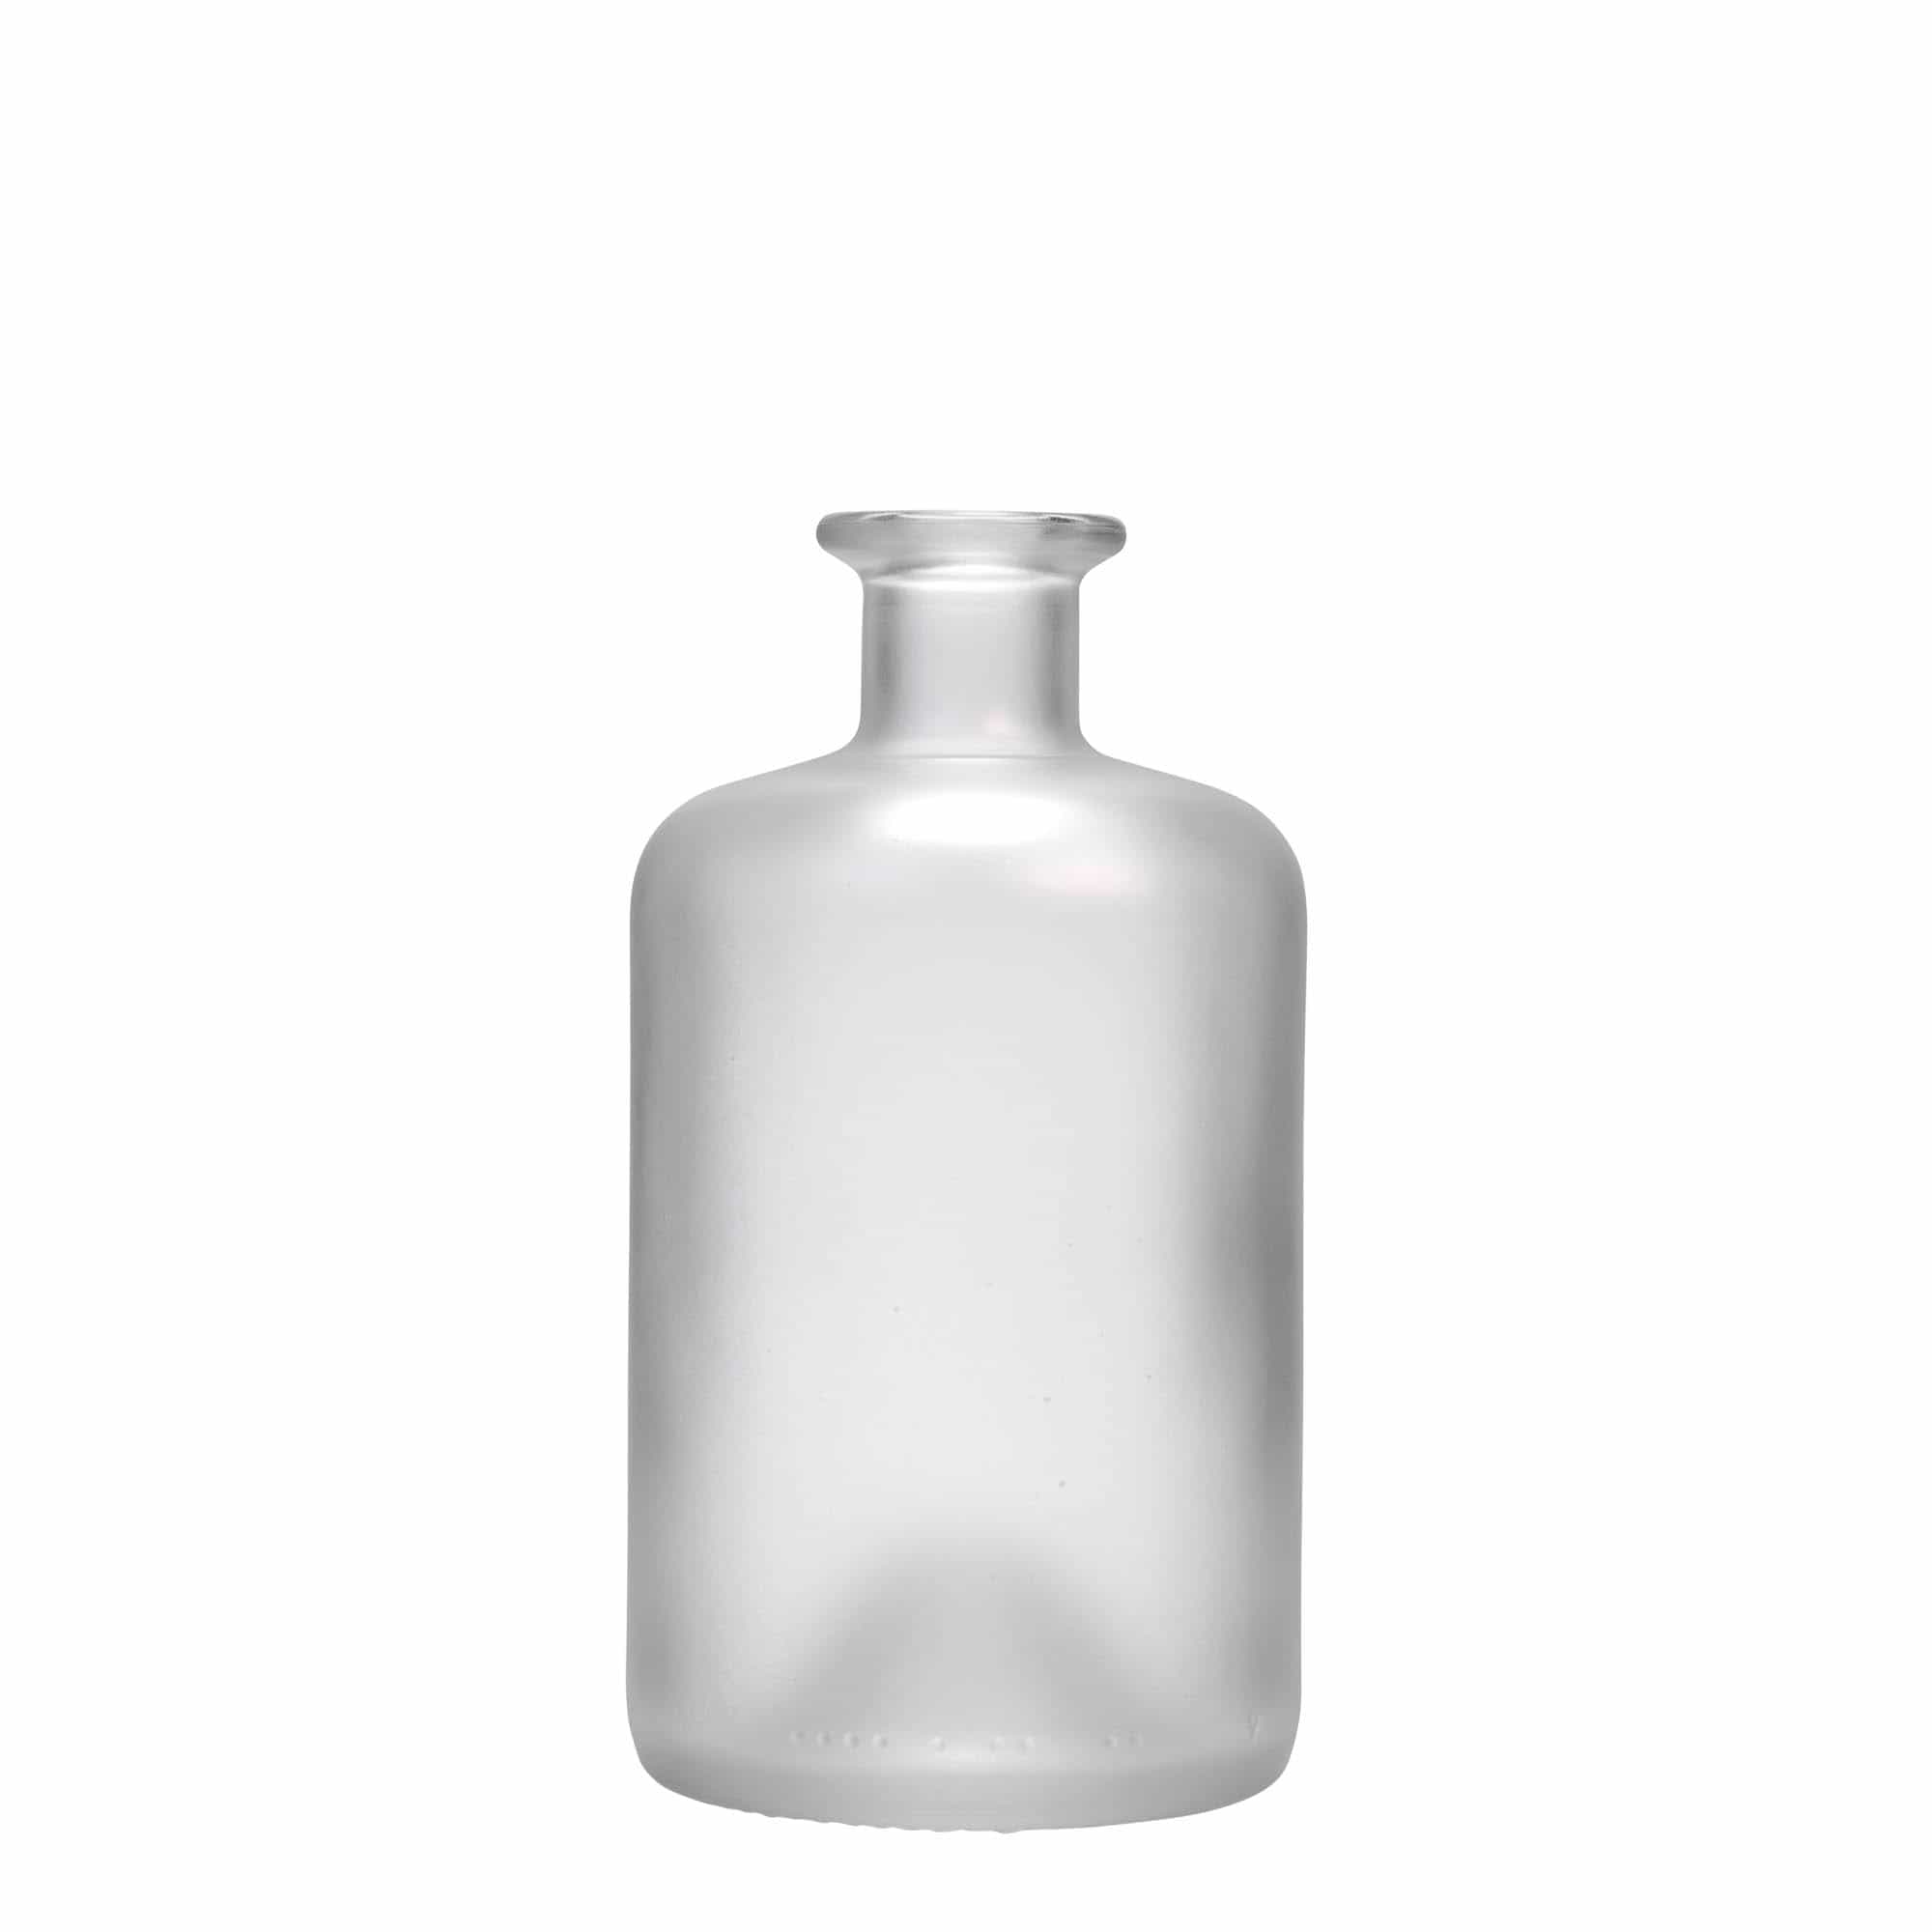 500 ml glass apothecary bottle, frosted, closure: cork